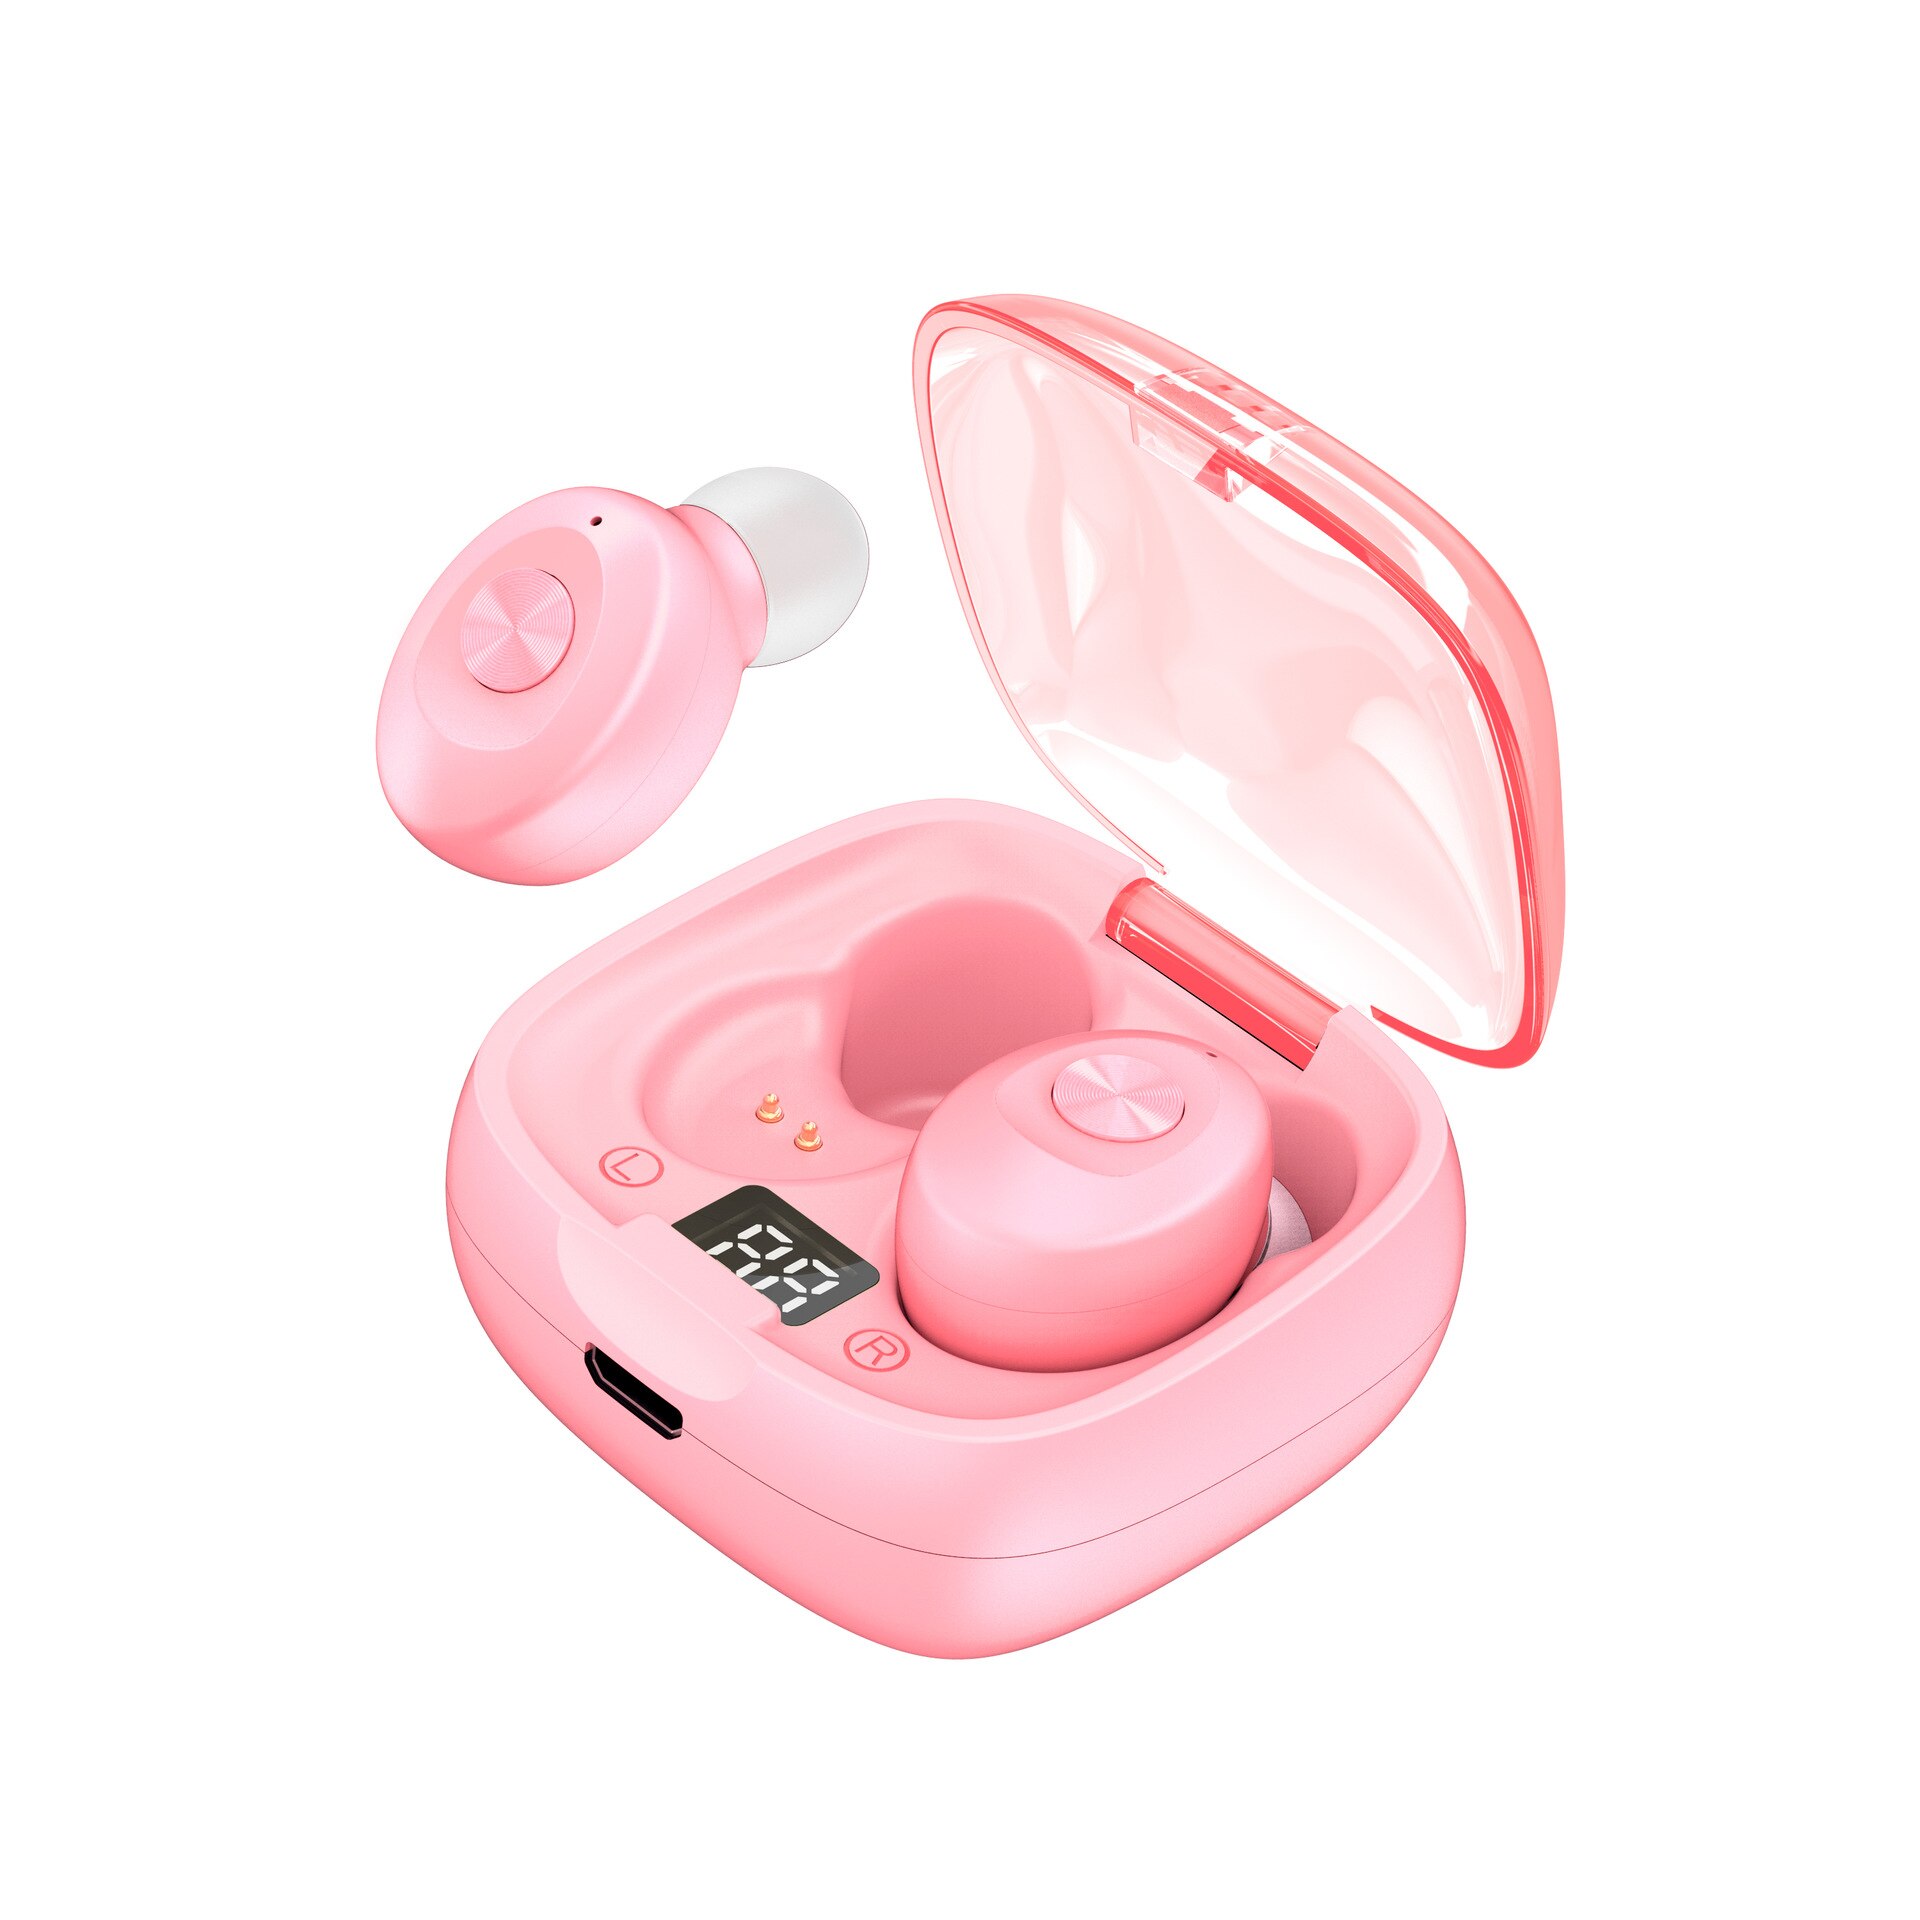 XG12 TWS Bluetooth 5.0 Earphone Stereo Wireless Earbus HIFI Sound Sport Earphones Handsfree Gaming Headset with Mic for Phone: X12-led-Pink